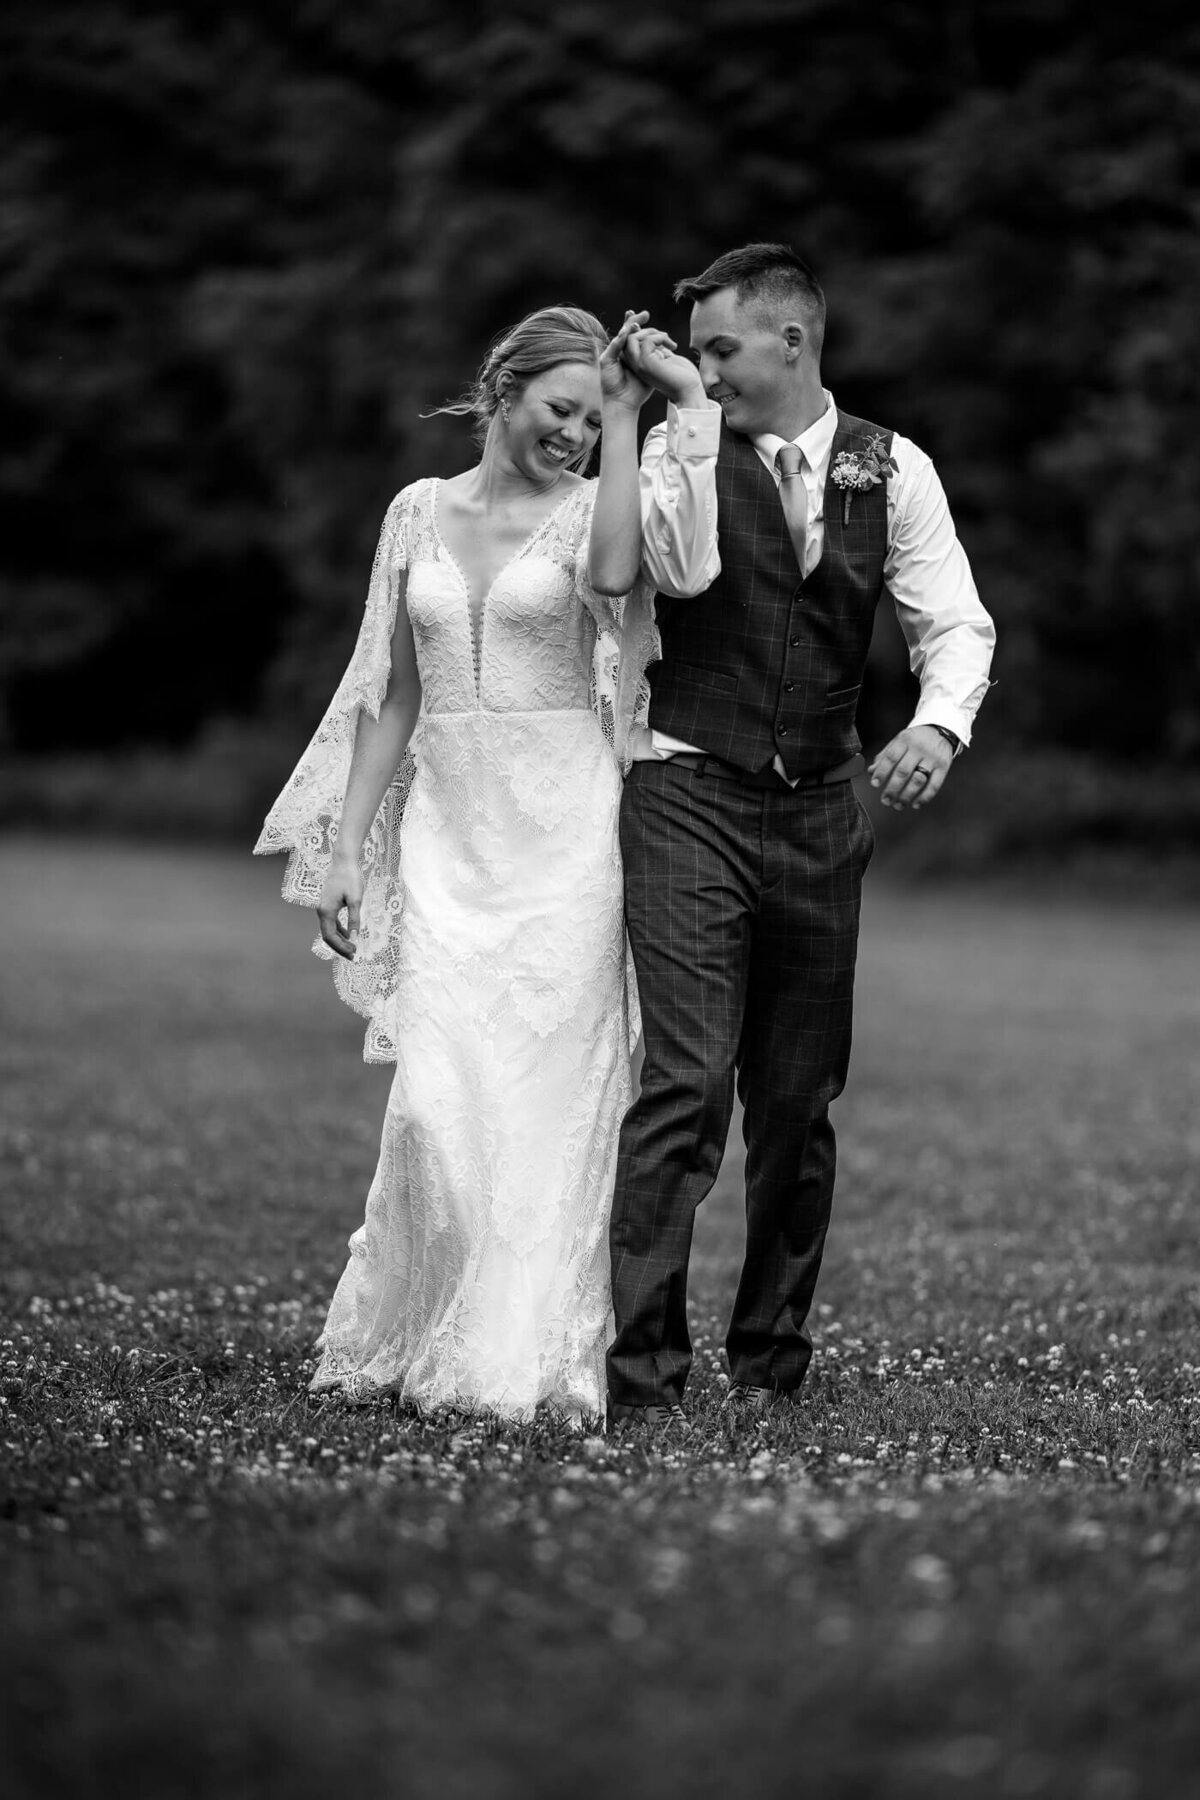 Black and white Pittsburgh wedding photos of bride and groom laughing and bumping into each other while holding hands. Captured at a wedding venue near Pittsburgh PA